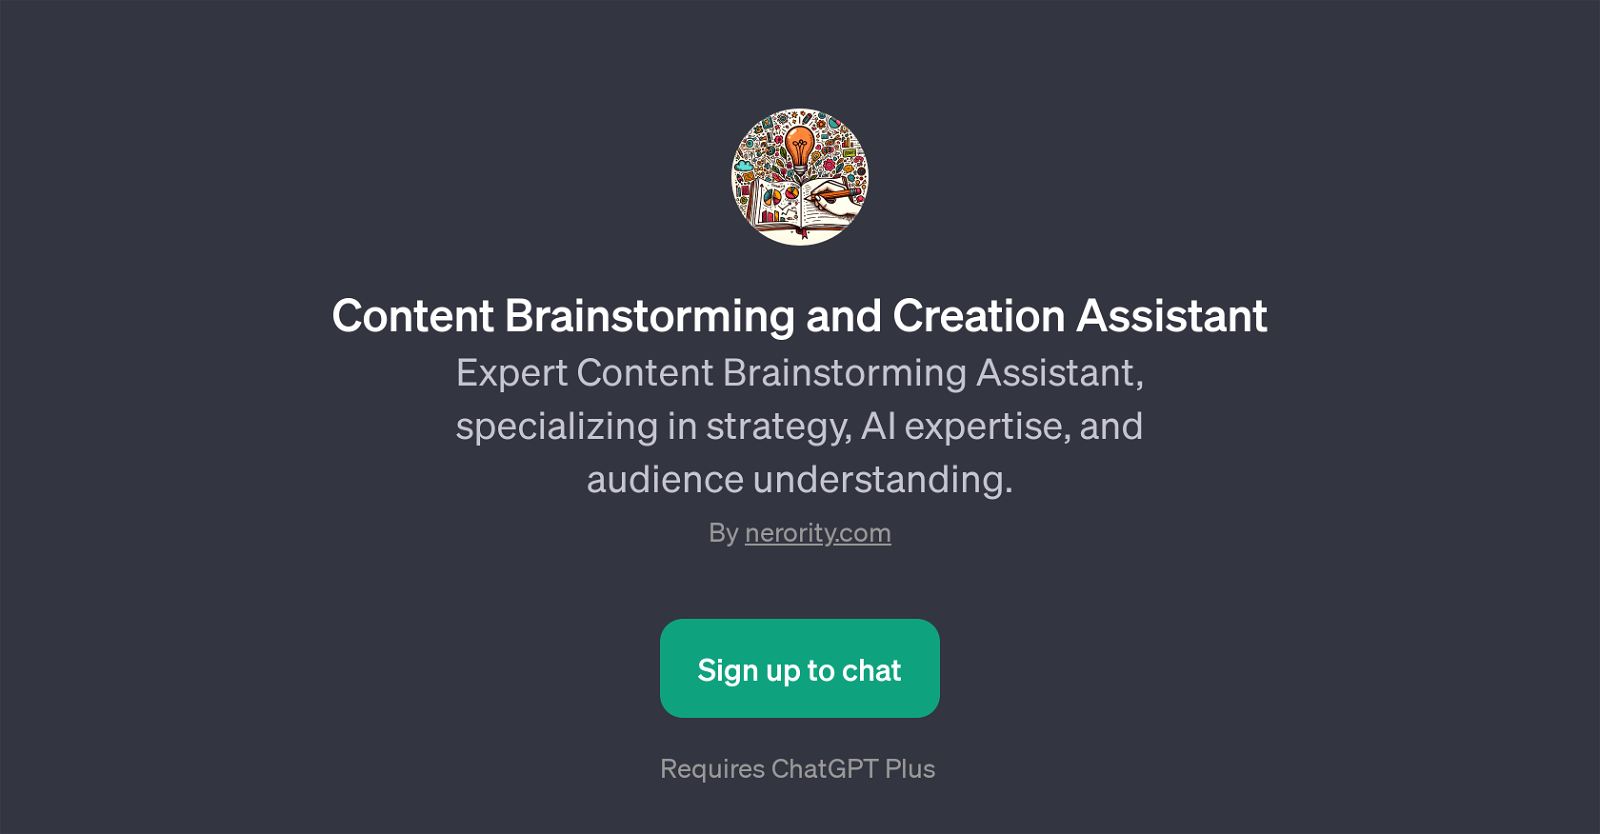 Content Brainstorming and Creation Assistant website